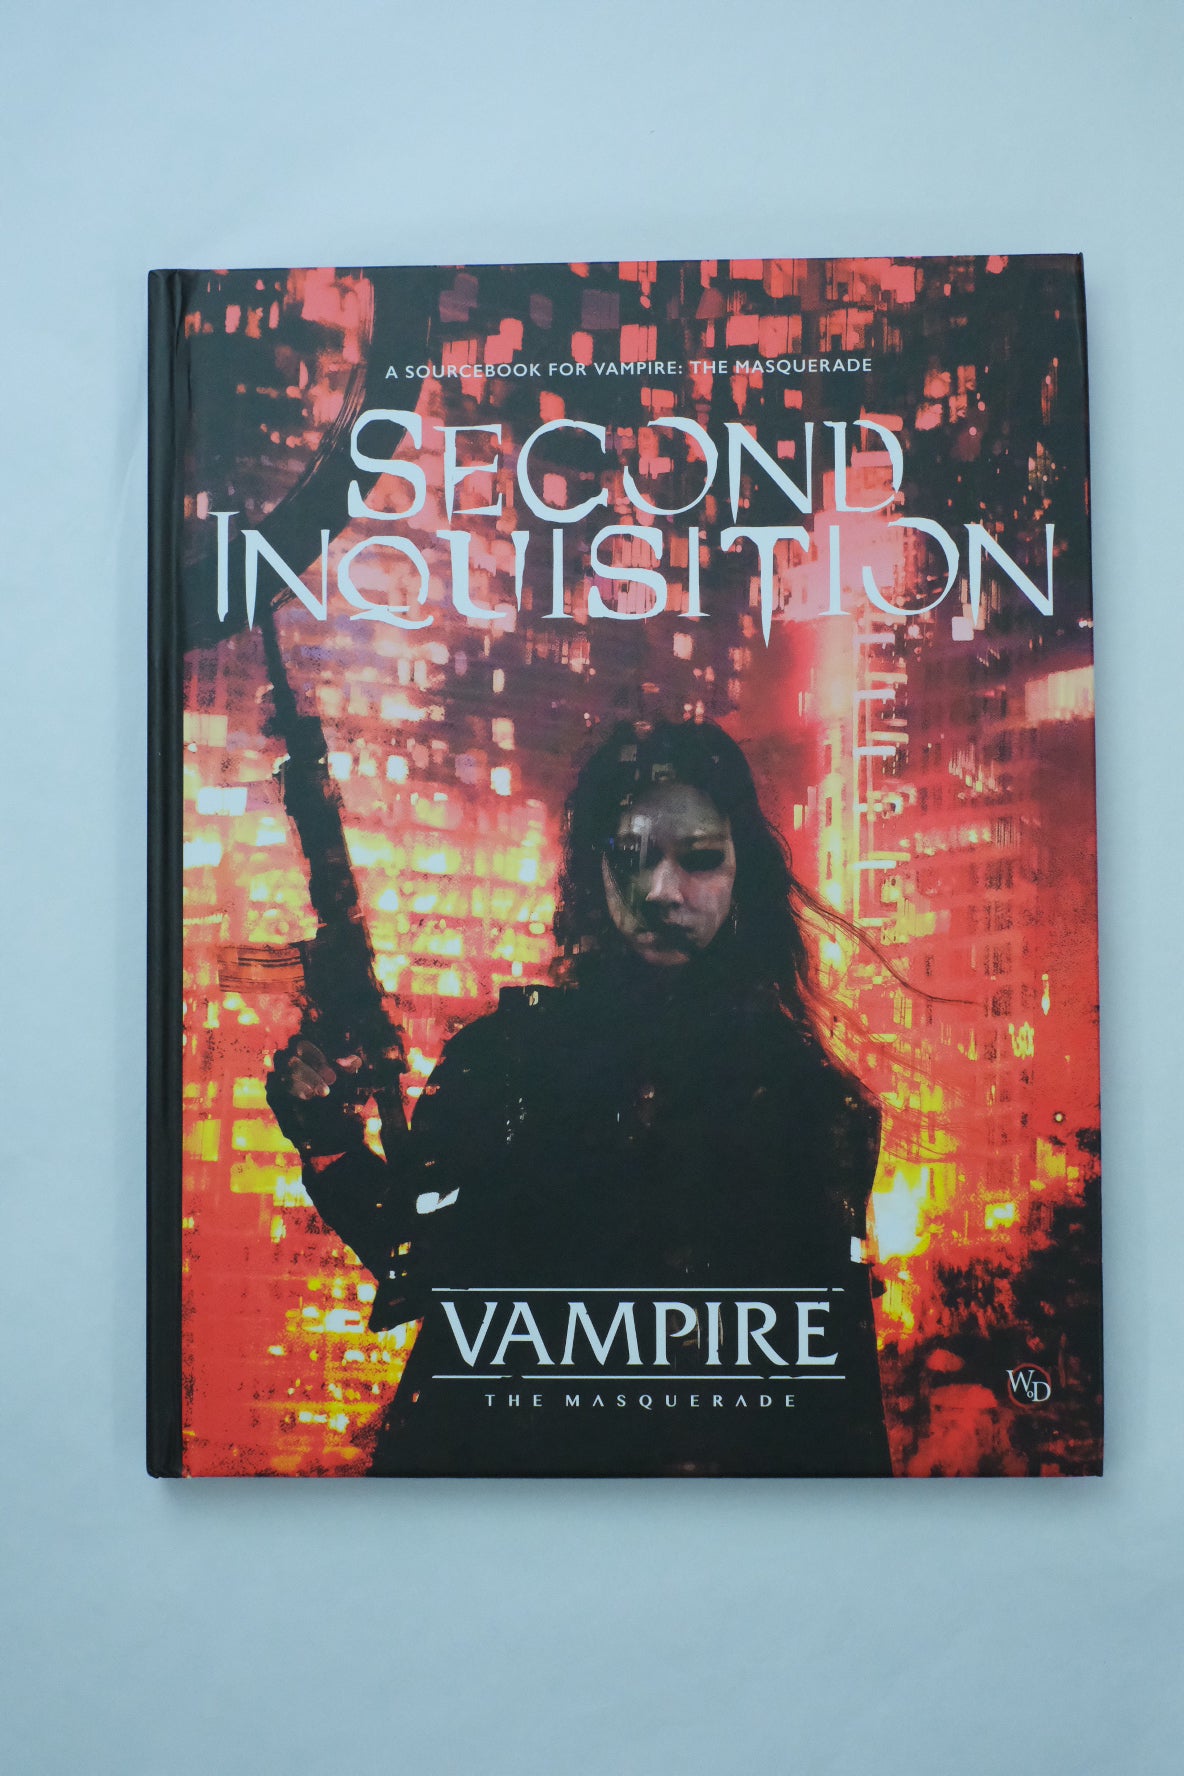 Vampire: The Masquerade 5th Edition - The 2nd Inquisition Sourcebook